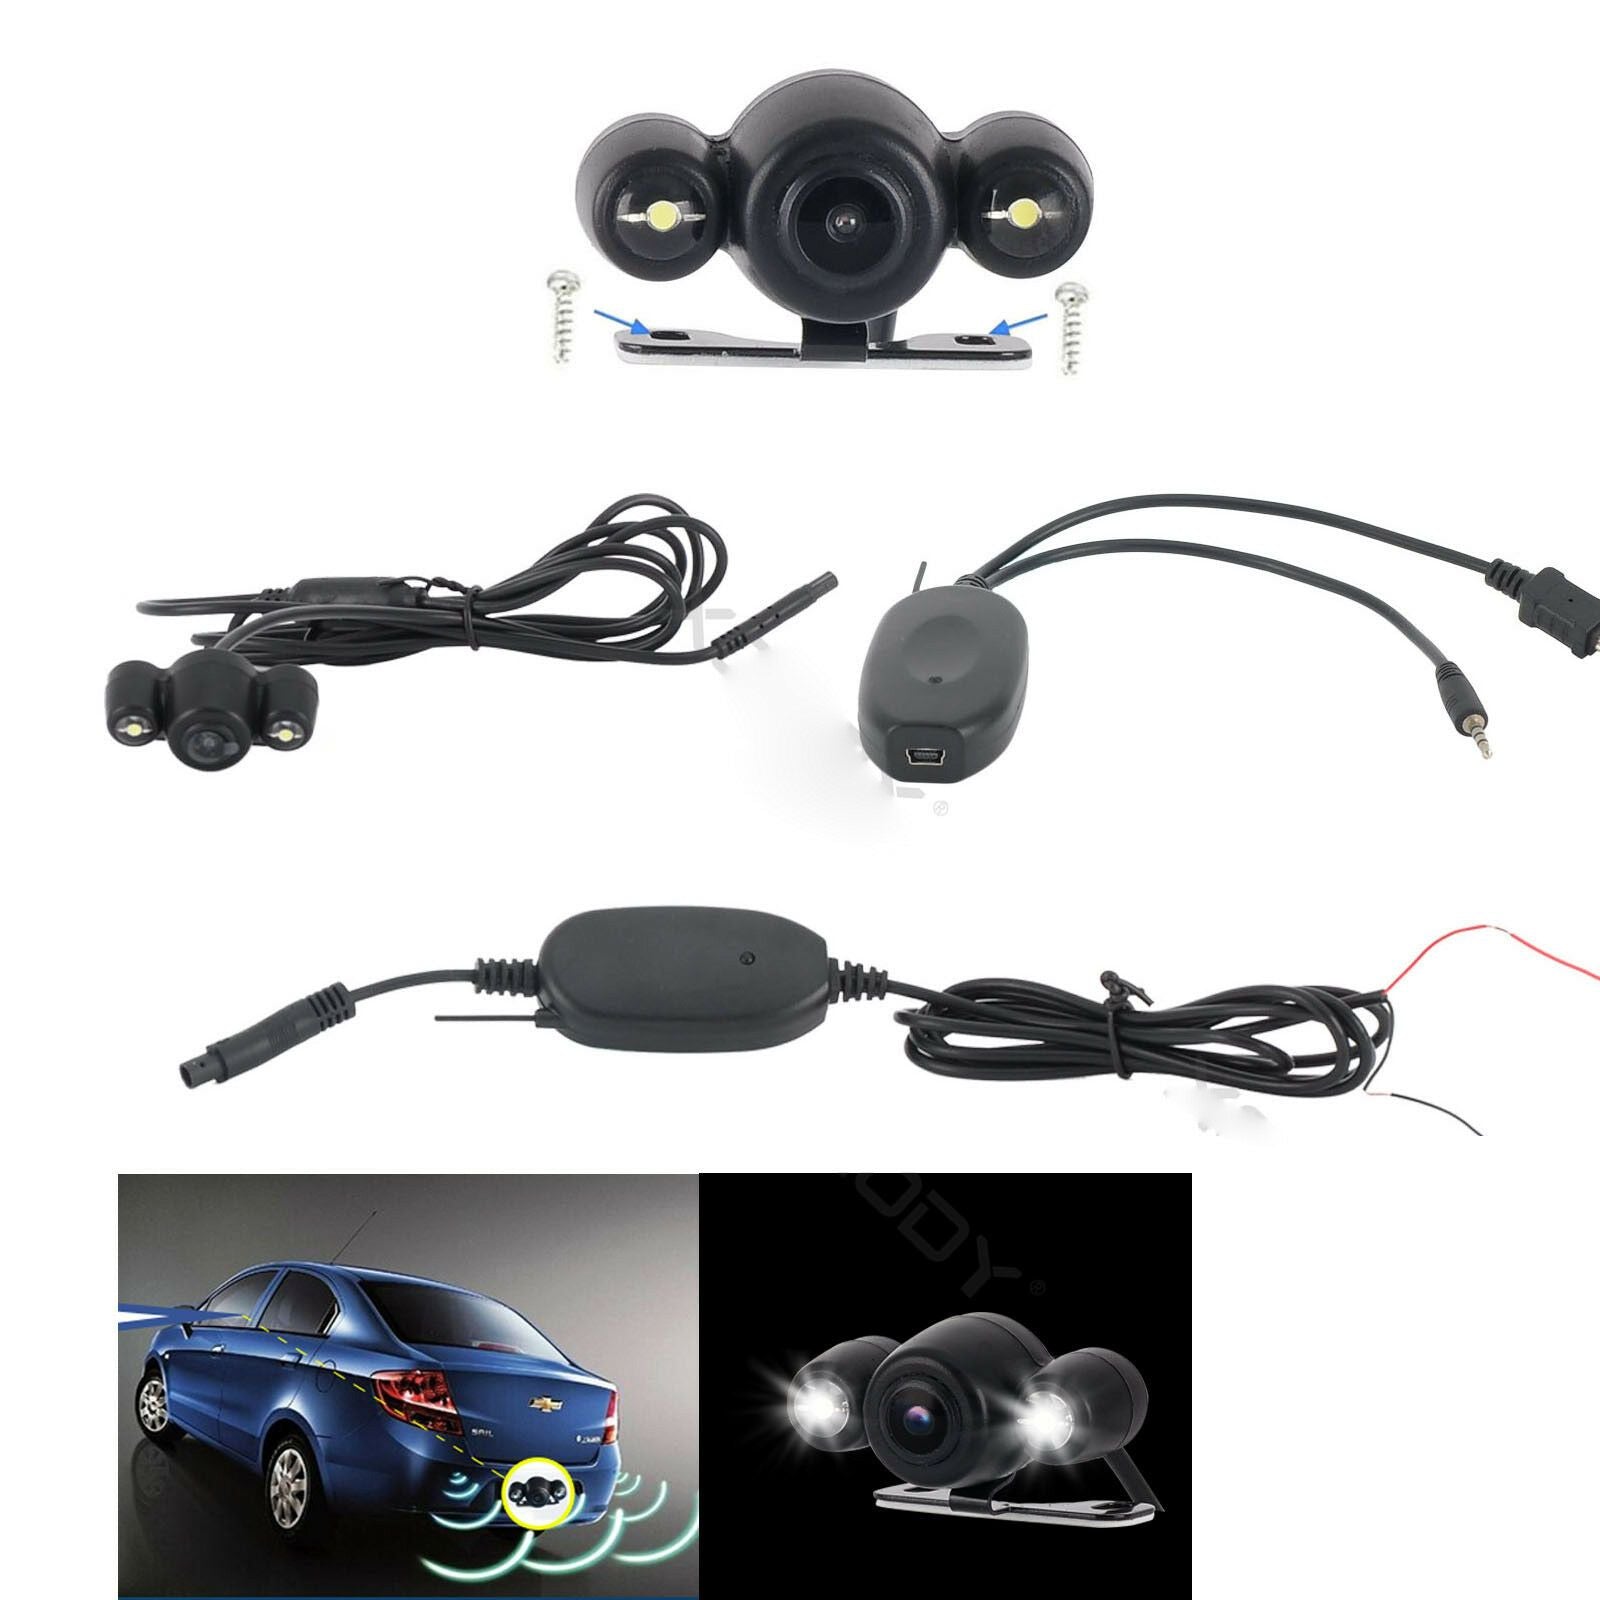 Cost-effective and Most worthwhile Wireless Car Rear Night Backup Parking Camera - XGODY 